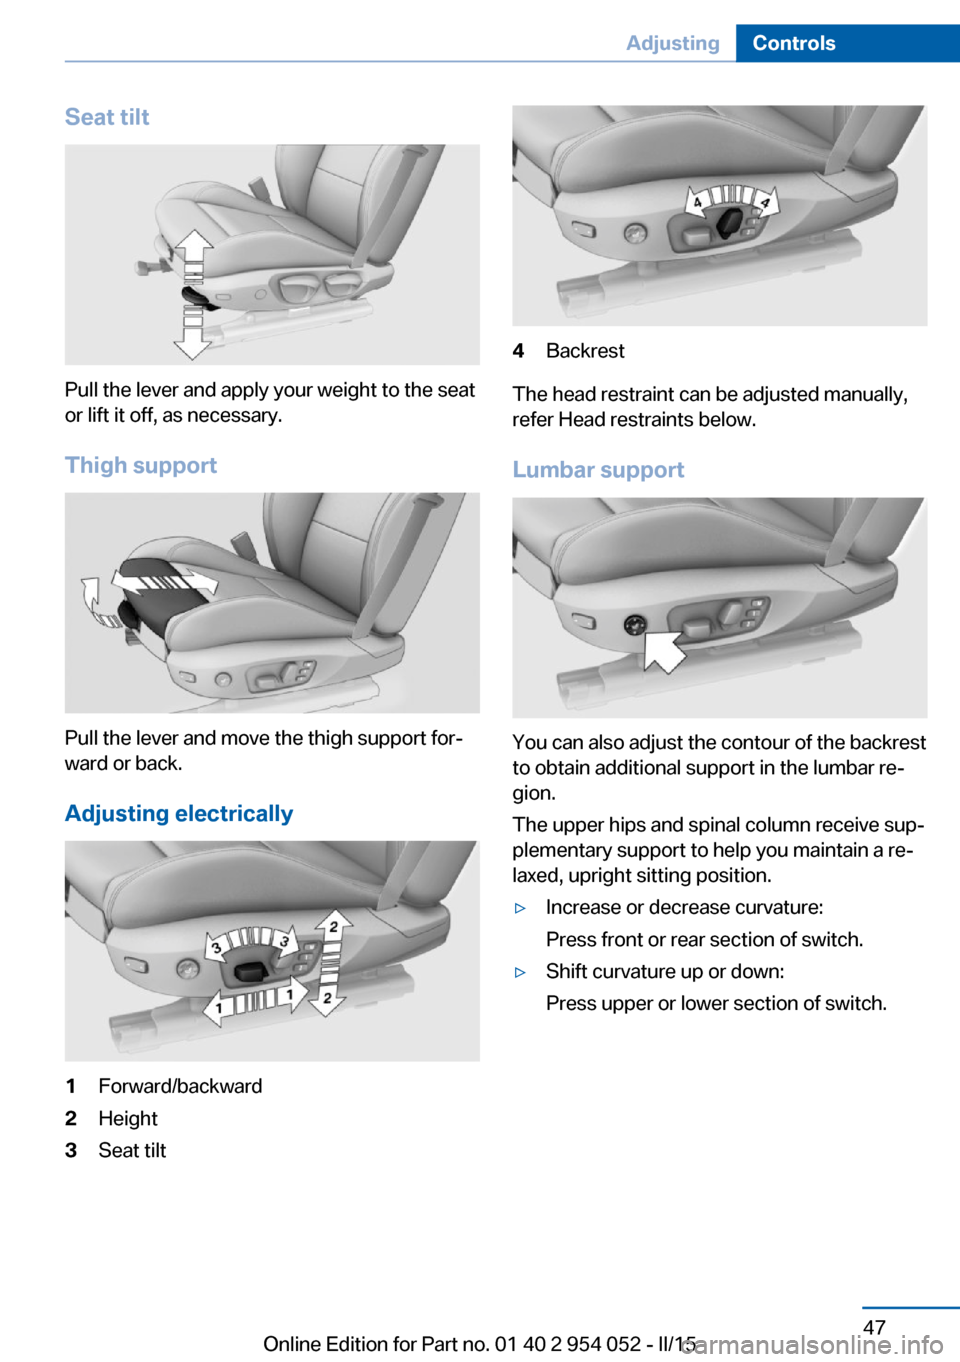 BMW X1 2015 E84 Owners Manual Seat tilt
Pull the lever and apply your weight to the seat
or lift it off, as necessary.
Thigh support
Pull the lever and move the thigh support for‐
ward or back.
Adjusting electrically
1Forward/ba